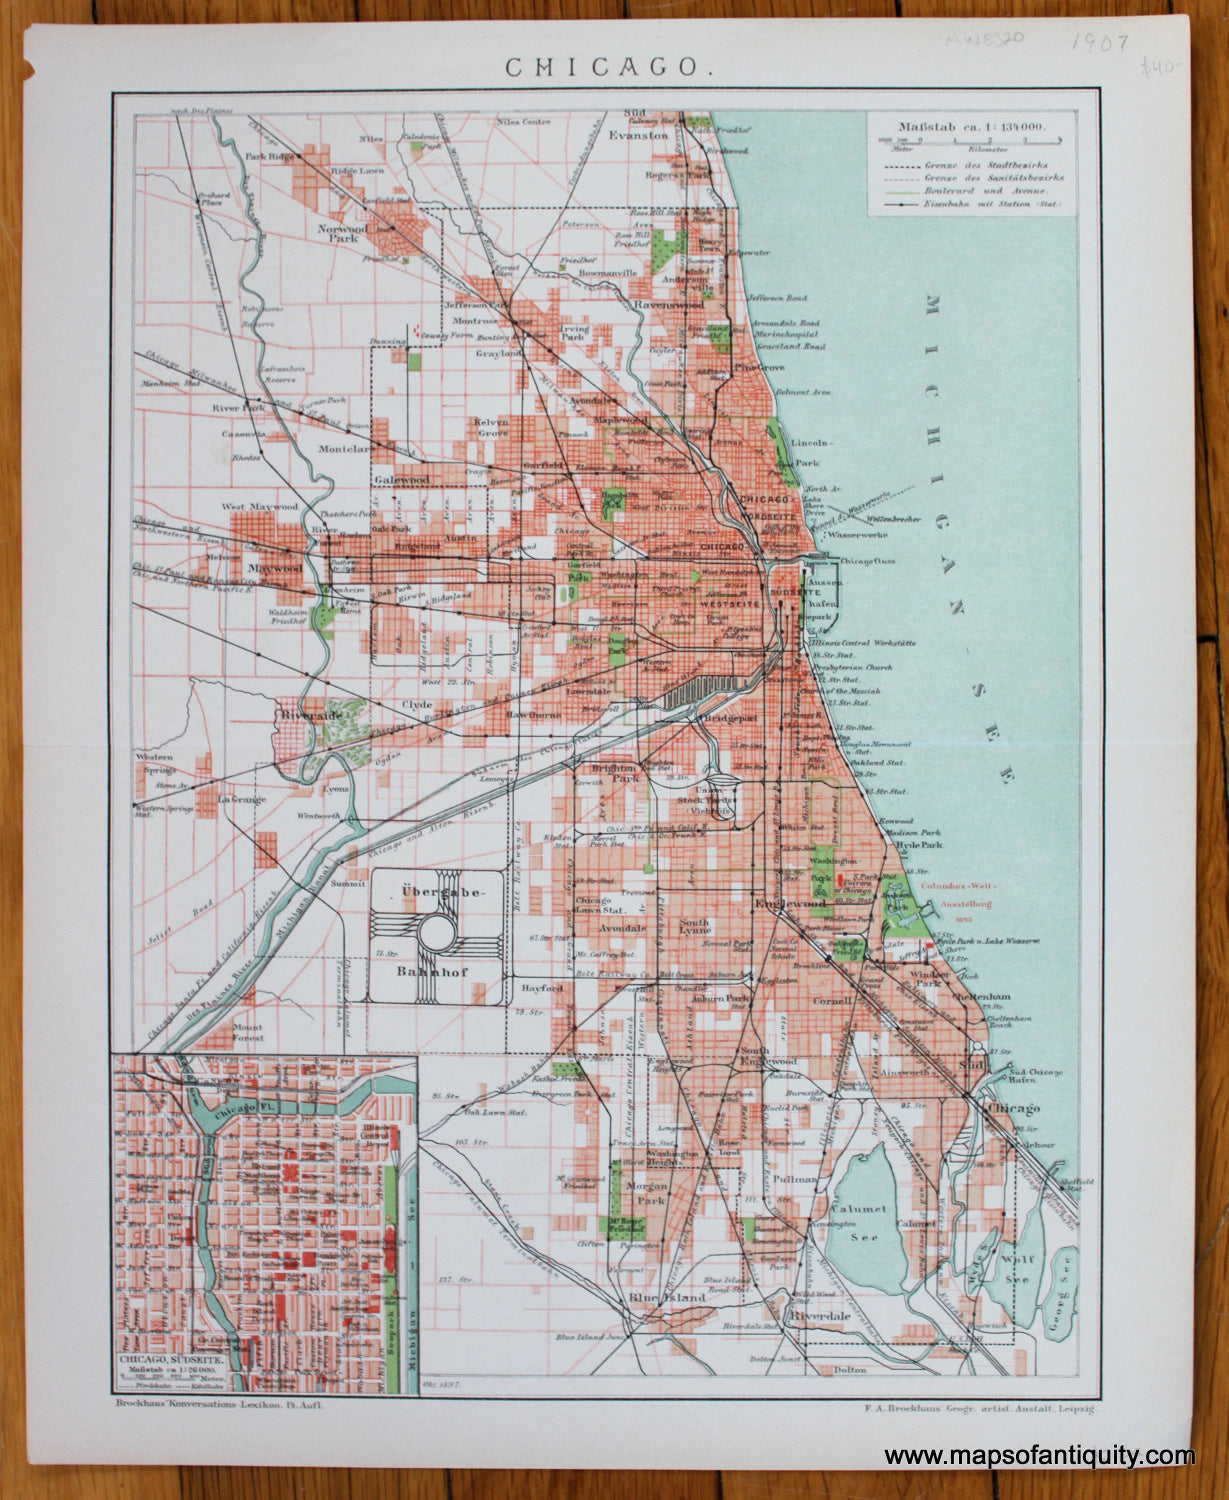 Antique-Printed-Color-Map-Chicago.-**********-United-States-Midwest-1907-Brockhaus-Maps-Of-Antiquity